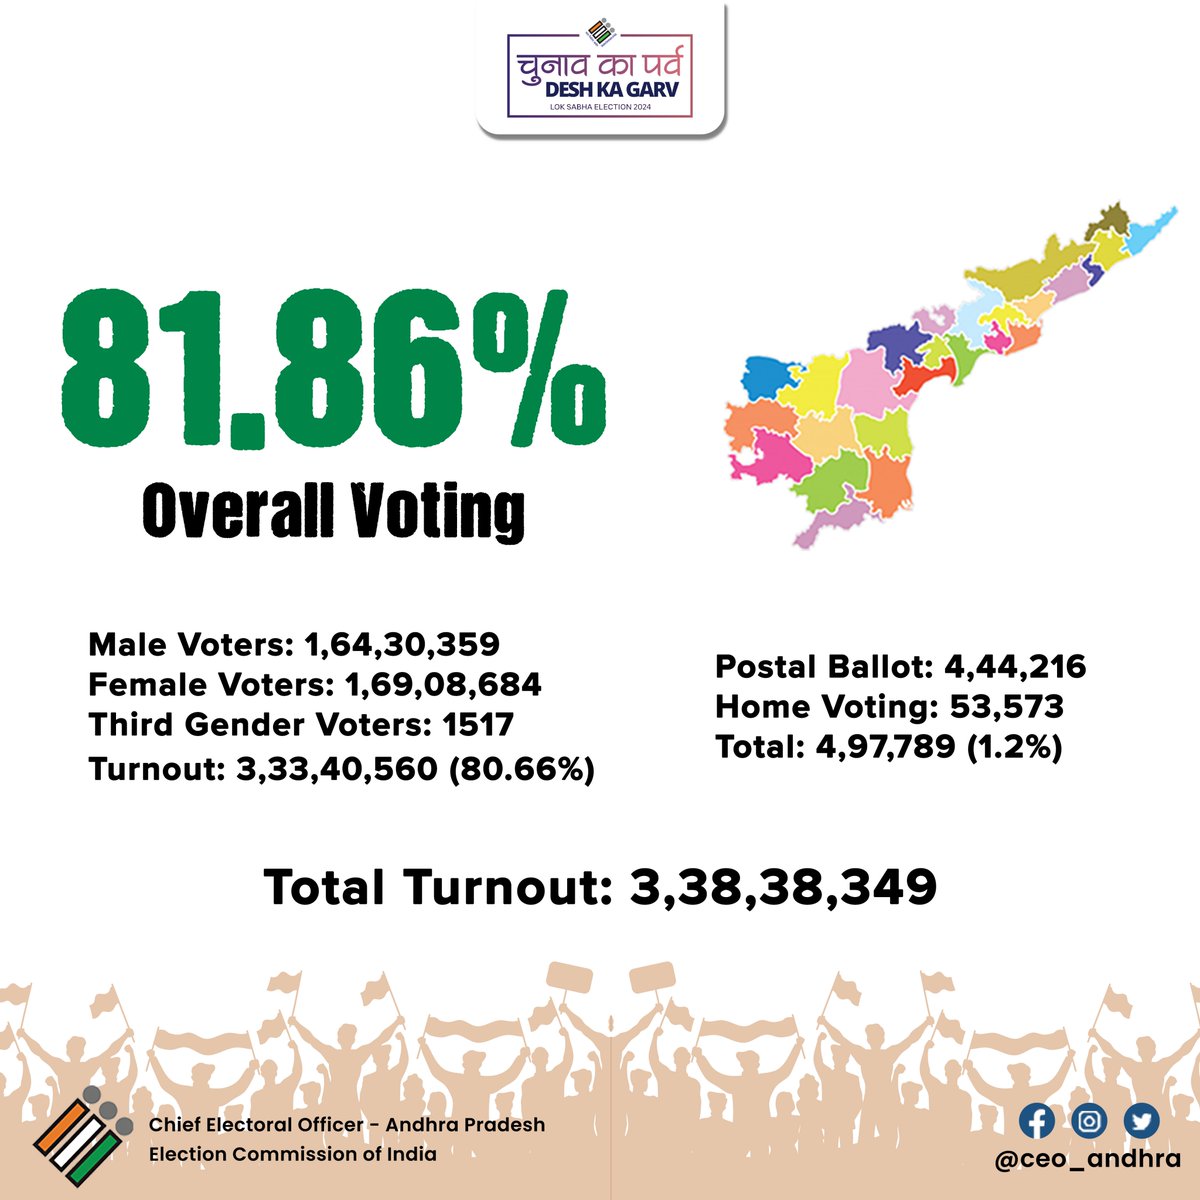 Andhra Pradesh's voters show us the power of democracy in action and record the highest voter turnout among the 4 Phases of polling concluded until now in the 2024 General Elections. 

Thank you for voting!
#APElections2024 

#SVEEP #ChunavKaParv #DeshKaGarv #ECI